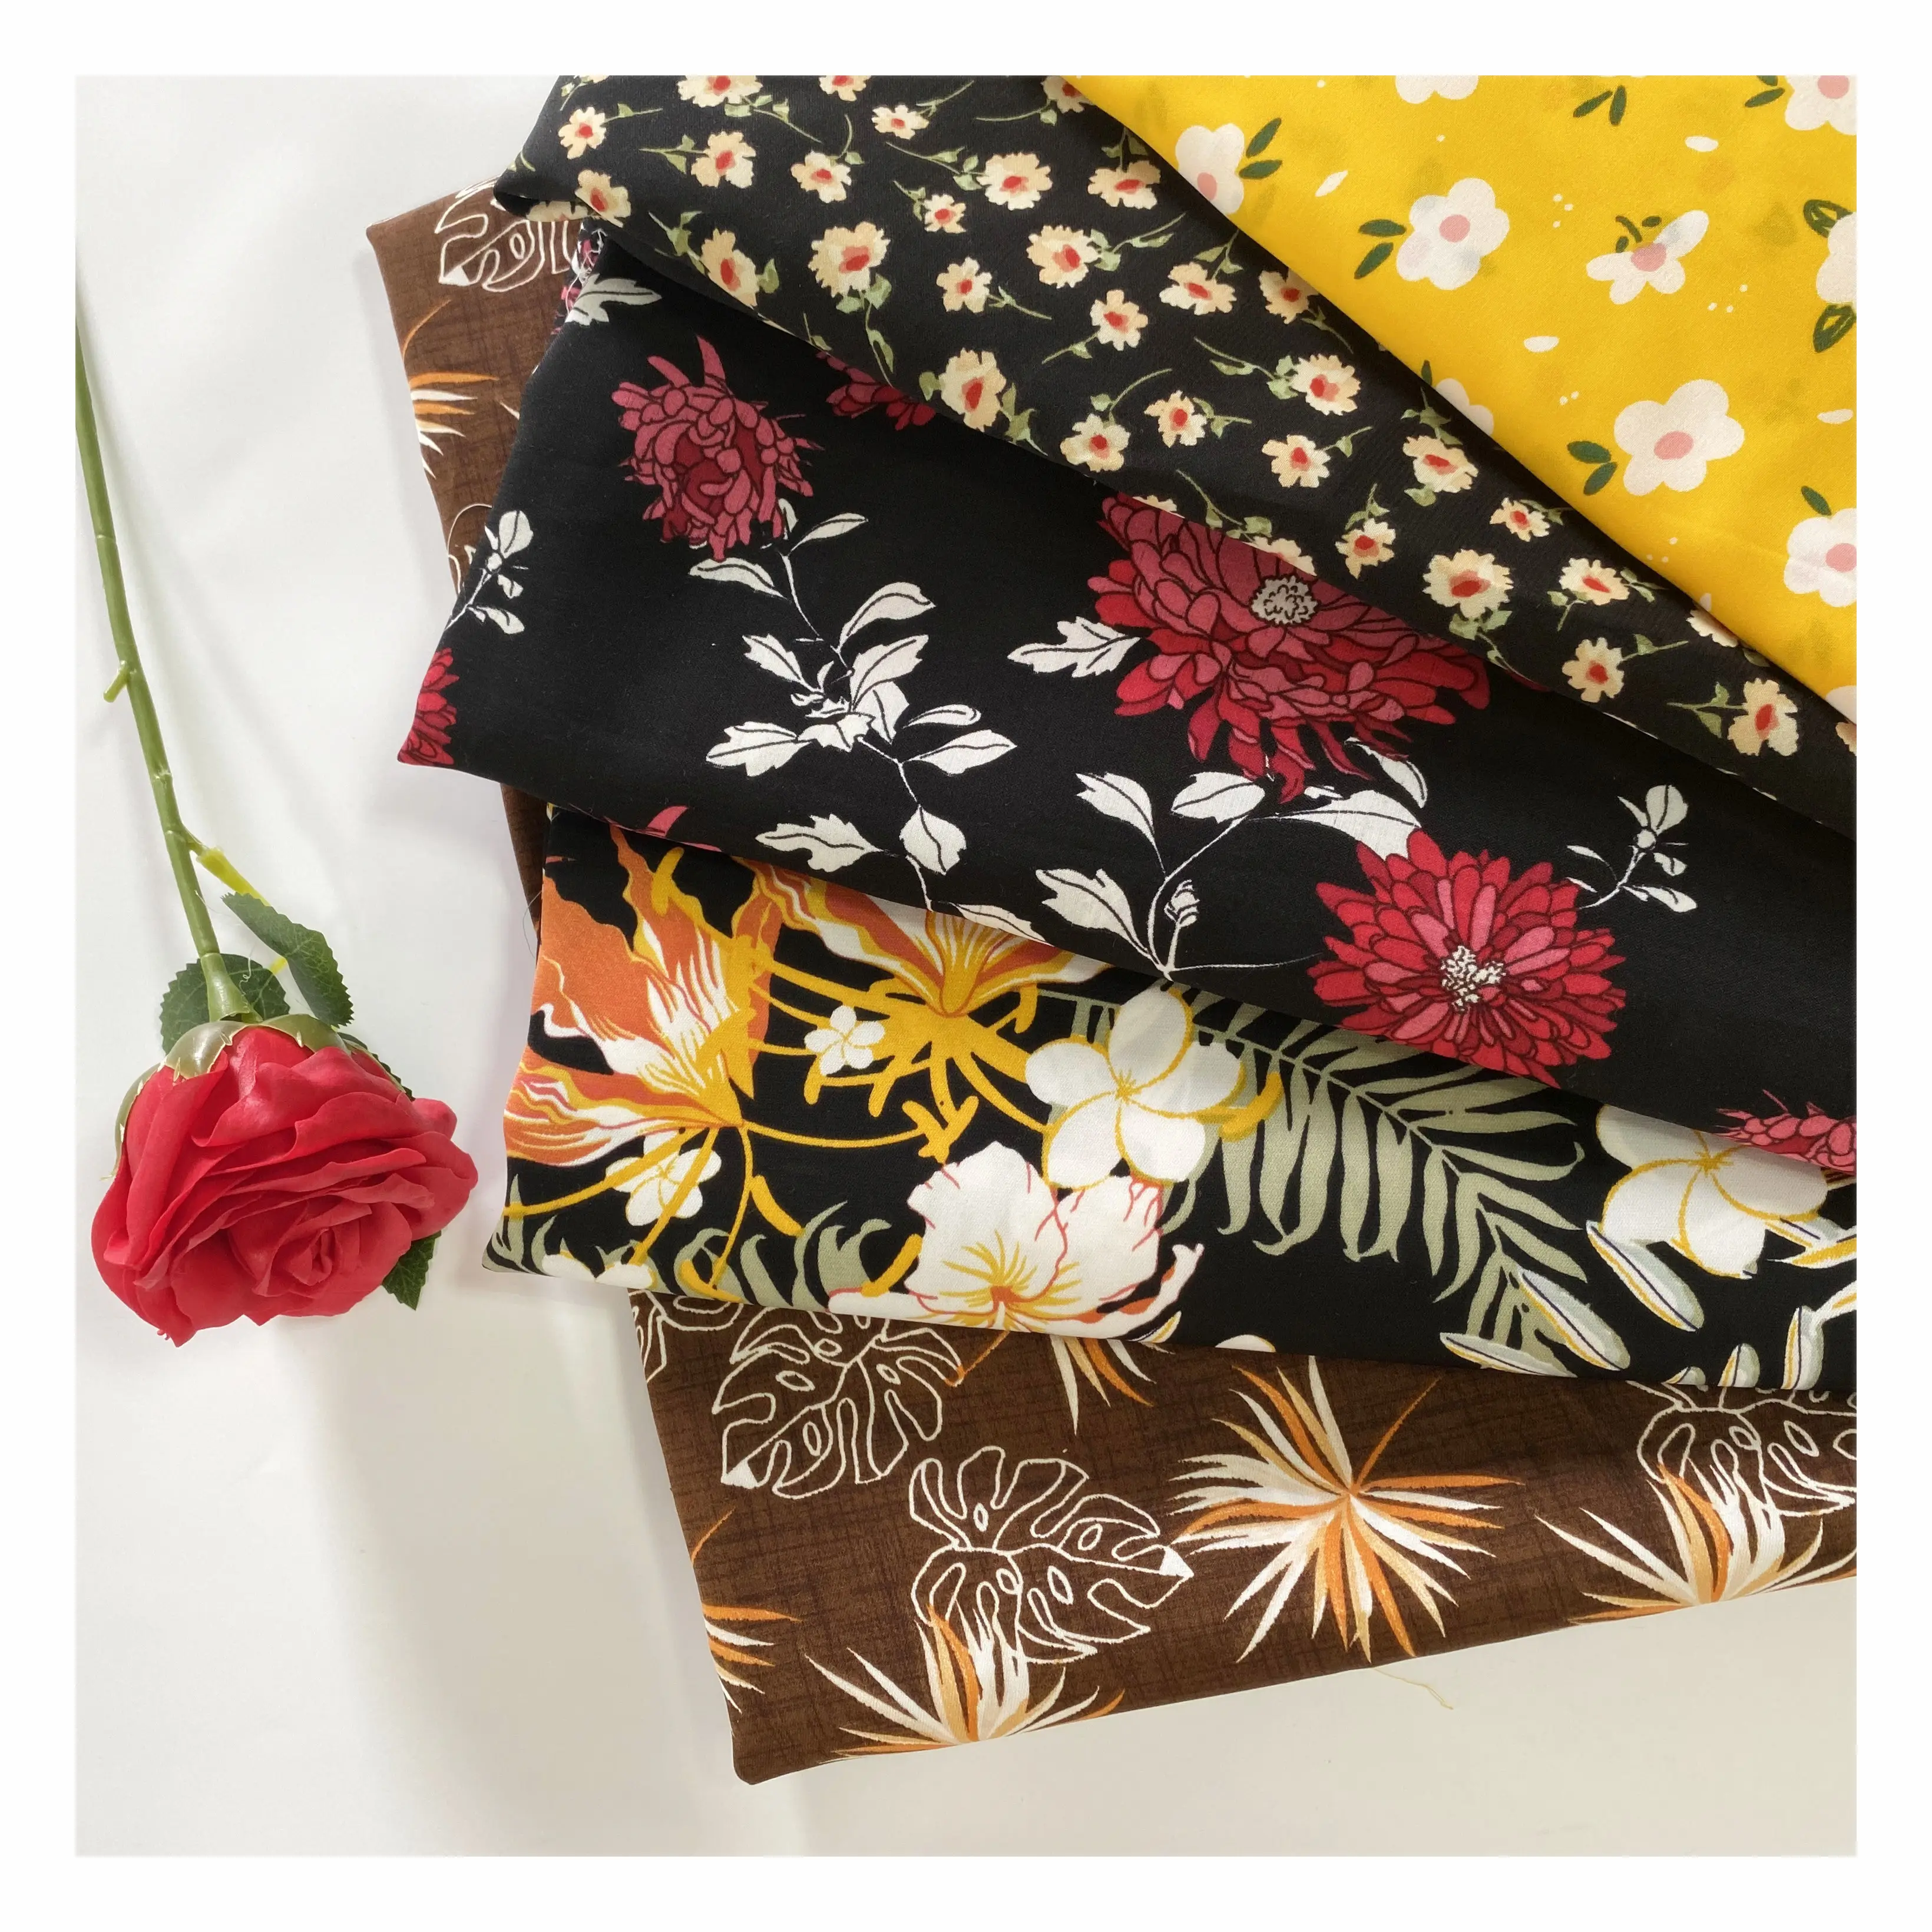 Wholesale Soft Woven Customized Floral Patterns 100% Polyester SPH Print Fabric For Dress